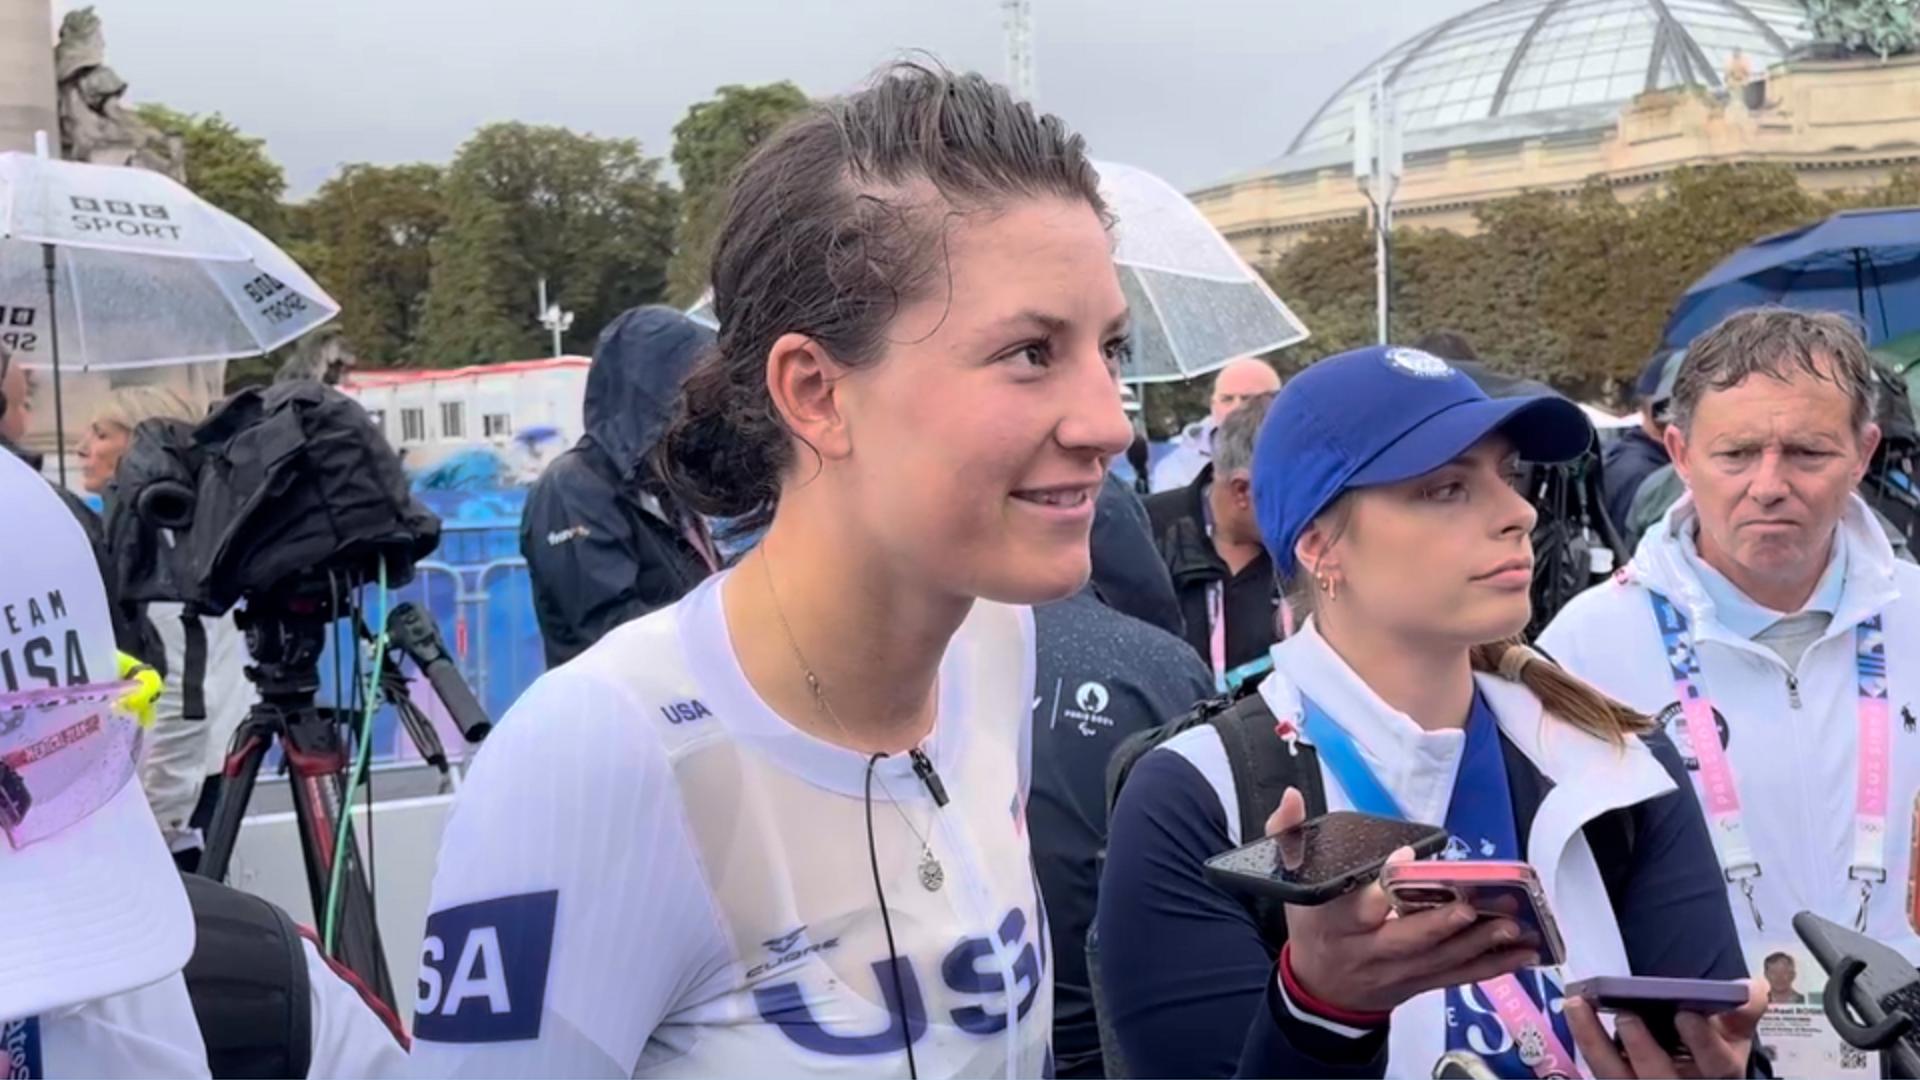 The 27-year-old Brownsburg cyclist, despite a crash on a course made slippery by rain, took bronze in the individual time trial at the Paris Olympics.